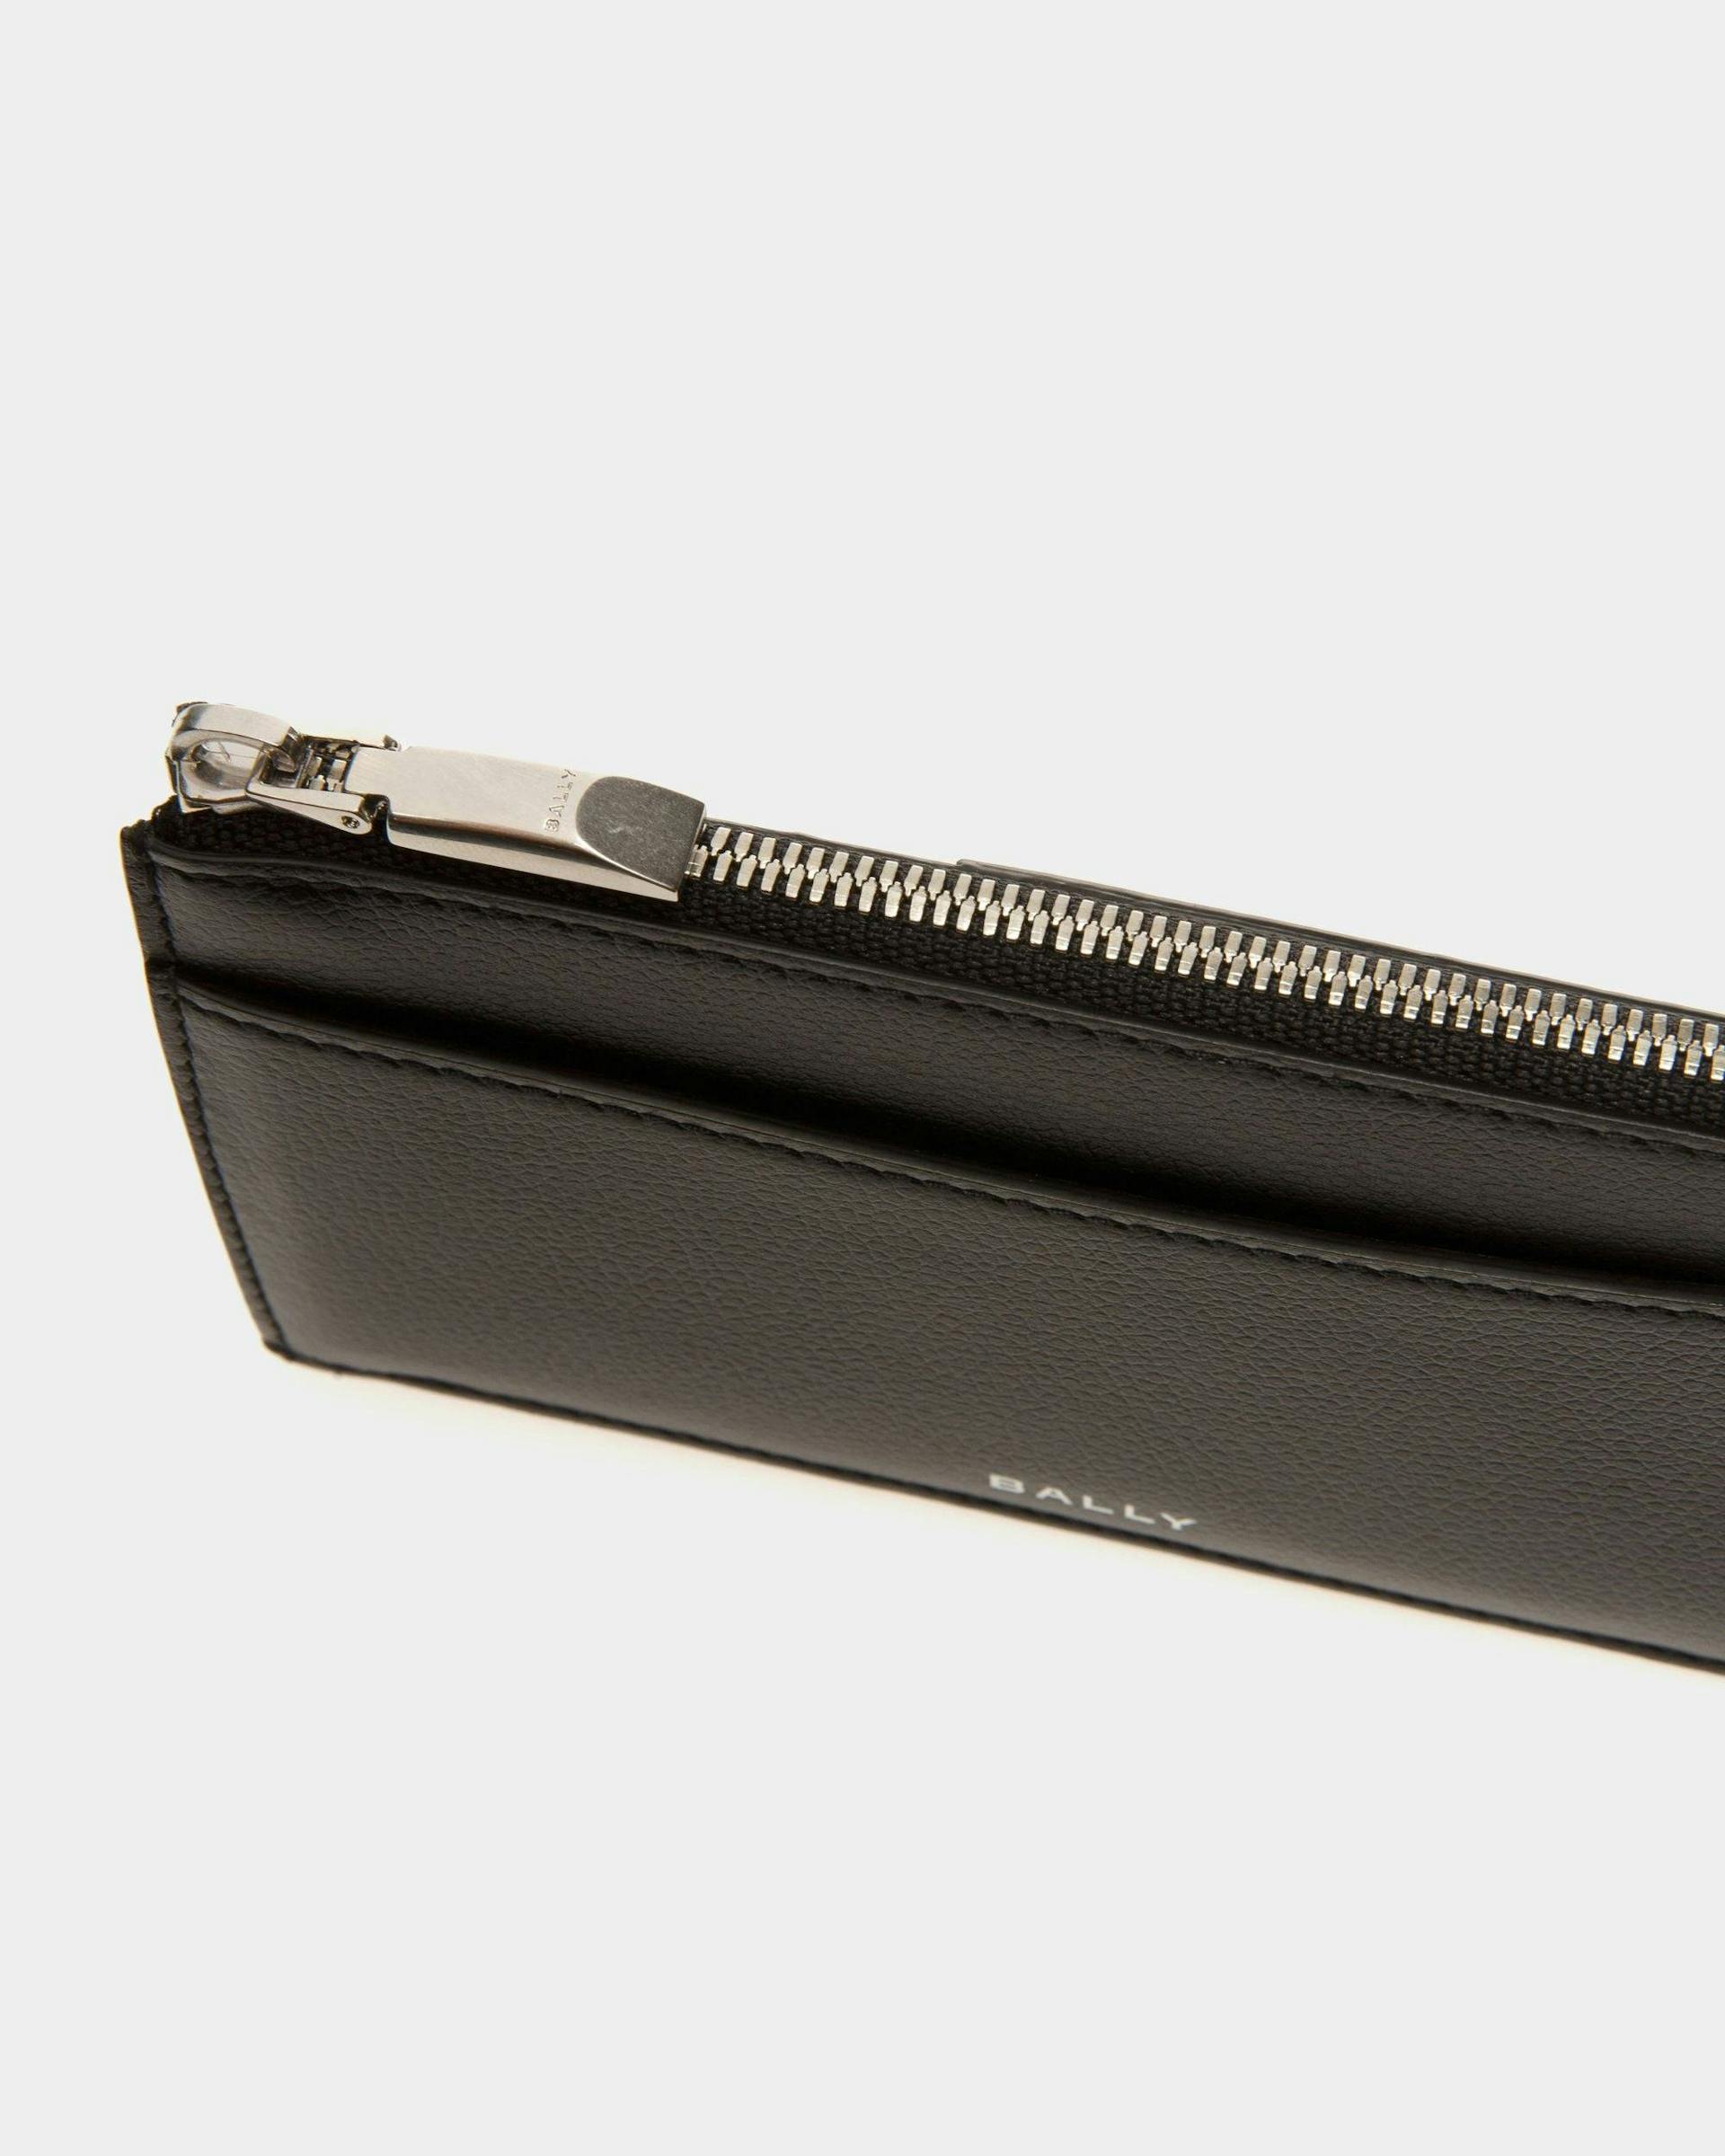 Men's Banque Business Card Holder In Black Leather | Bally | Still Life Detail